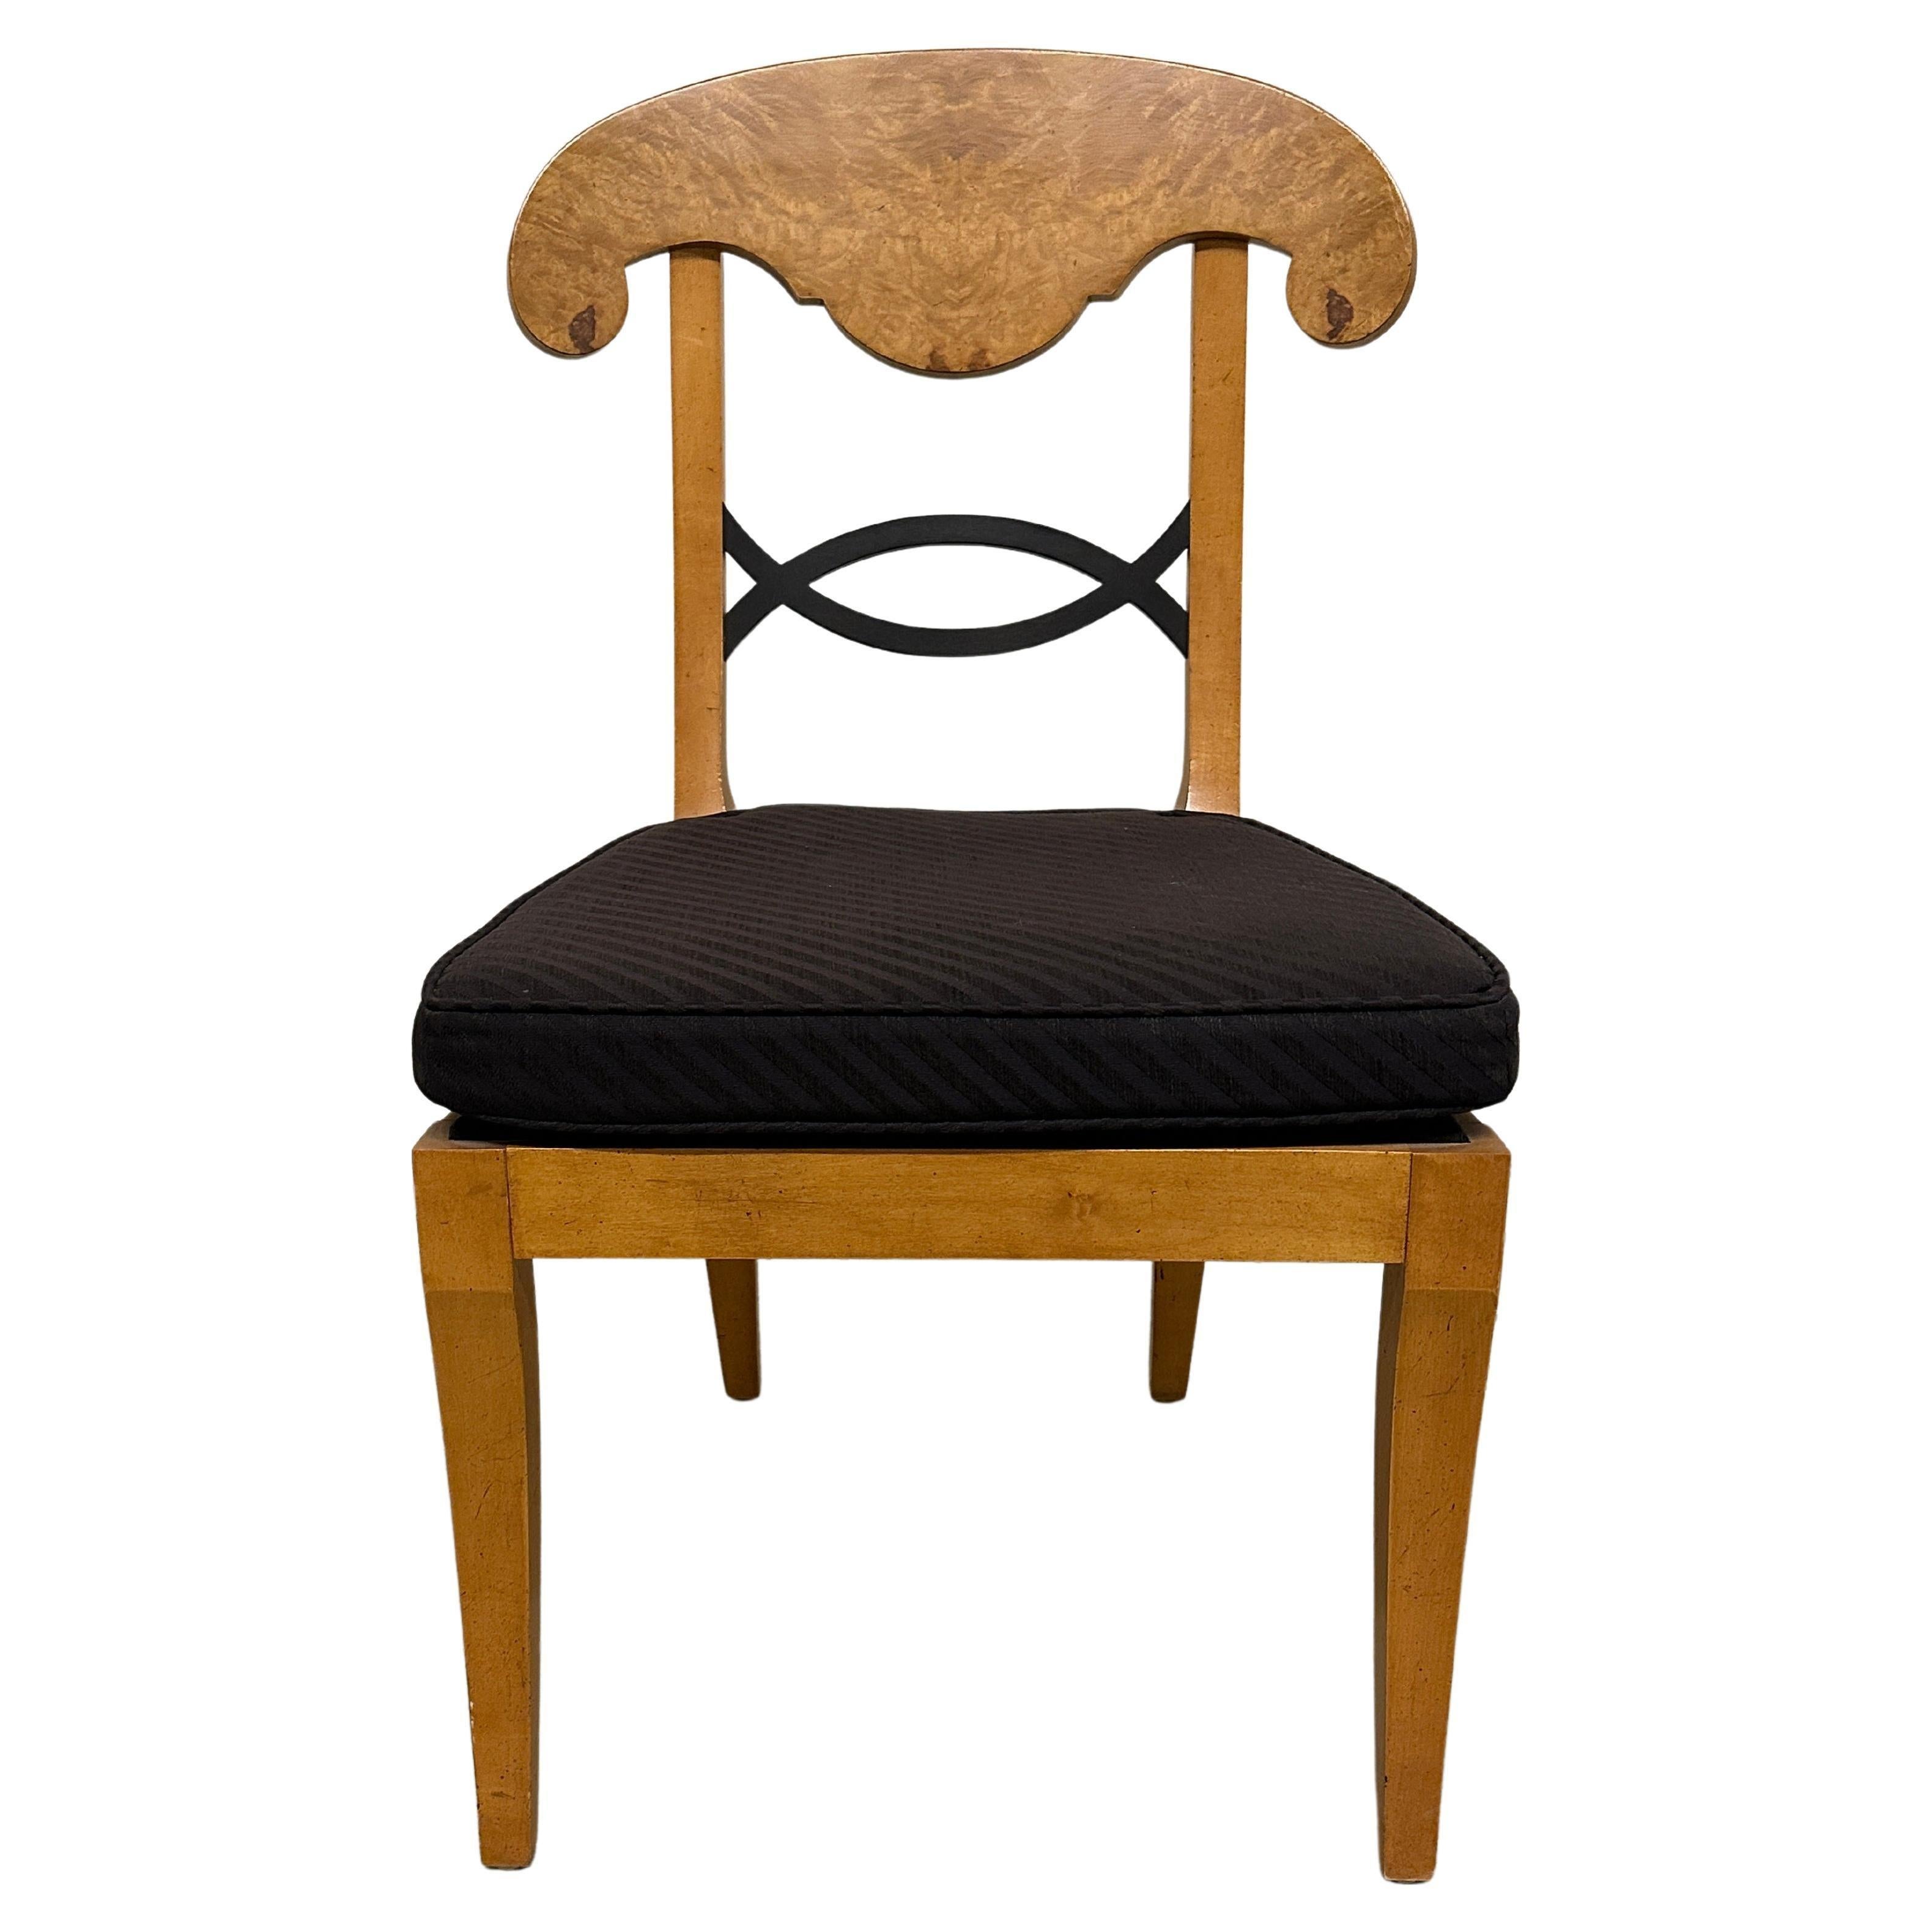 The high-end Baker manufacturer was inspired by this so refined Biedermeier style and made these chairs with the same attention.
Biedermeier itself was inspired by the Directoire French style which shows that every period gets its inspiration from